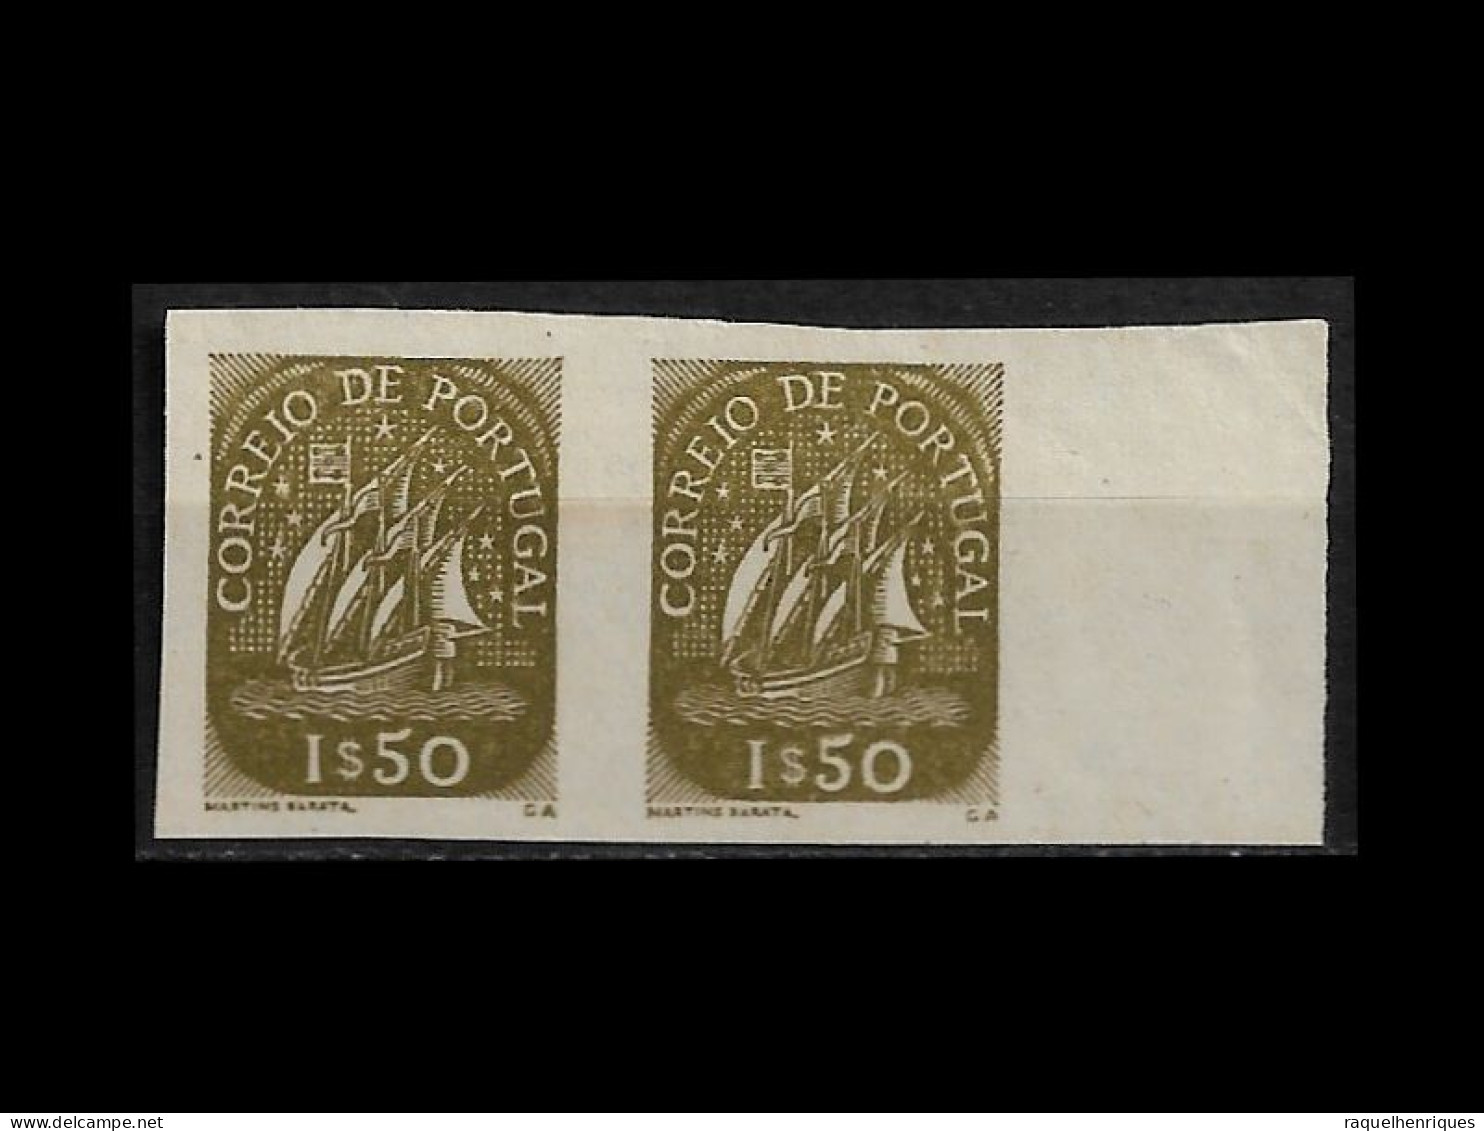 PORTUGAL STAMP - 1948-49 SHIP - Md#699 IMPERF. PAIR - PROVA - PROOF - MH (LESP#39) - Prove E Ristampe